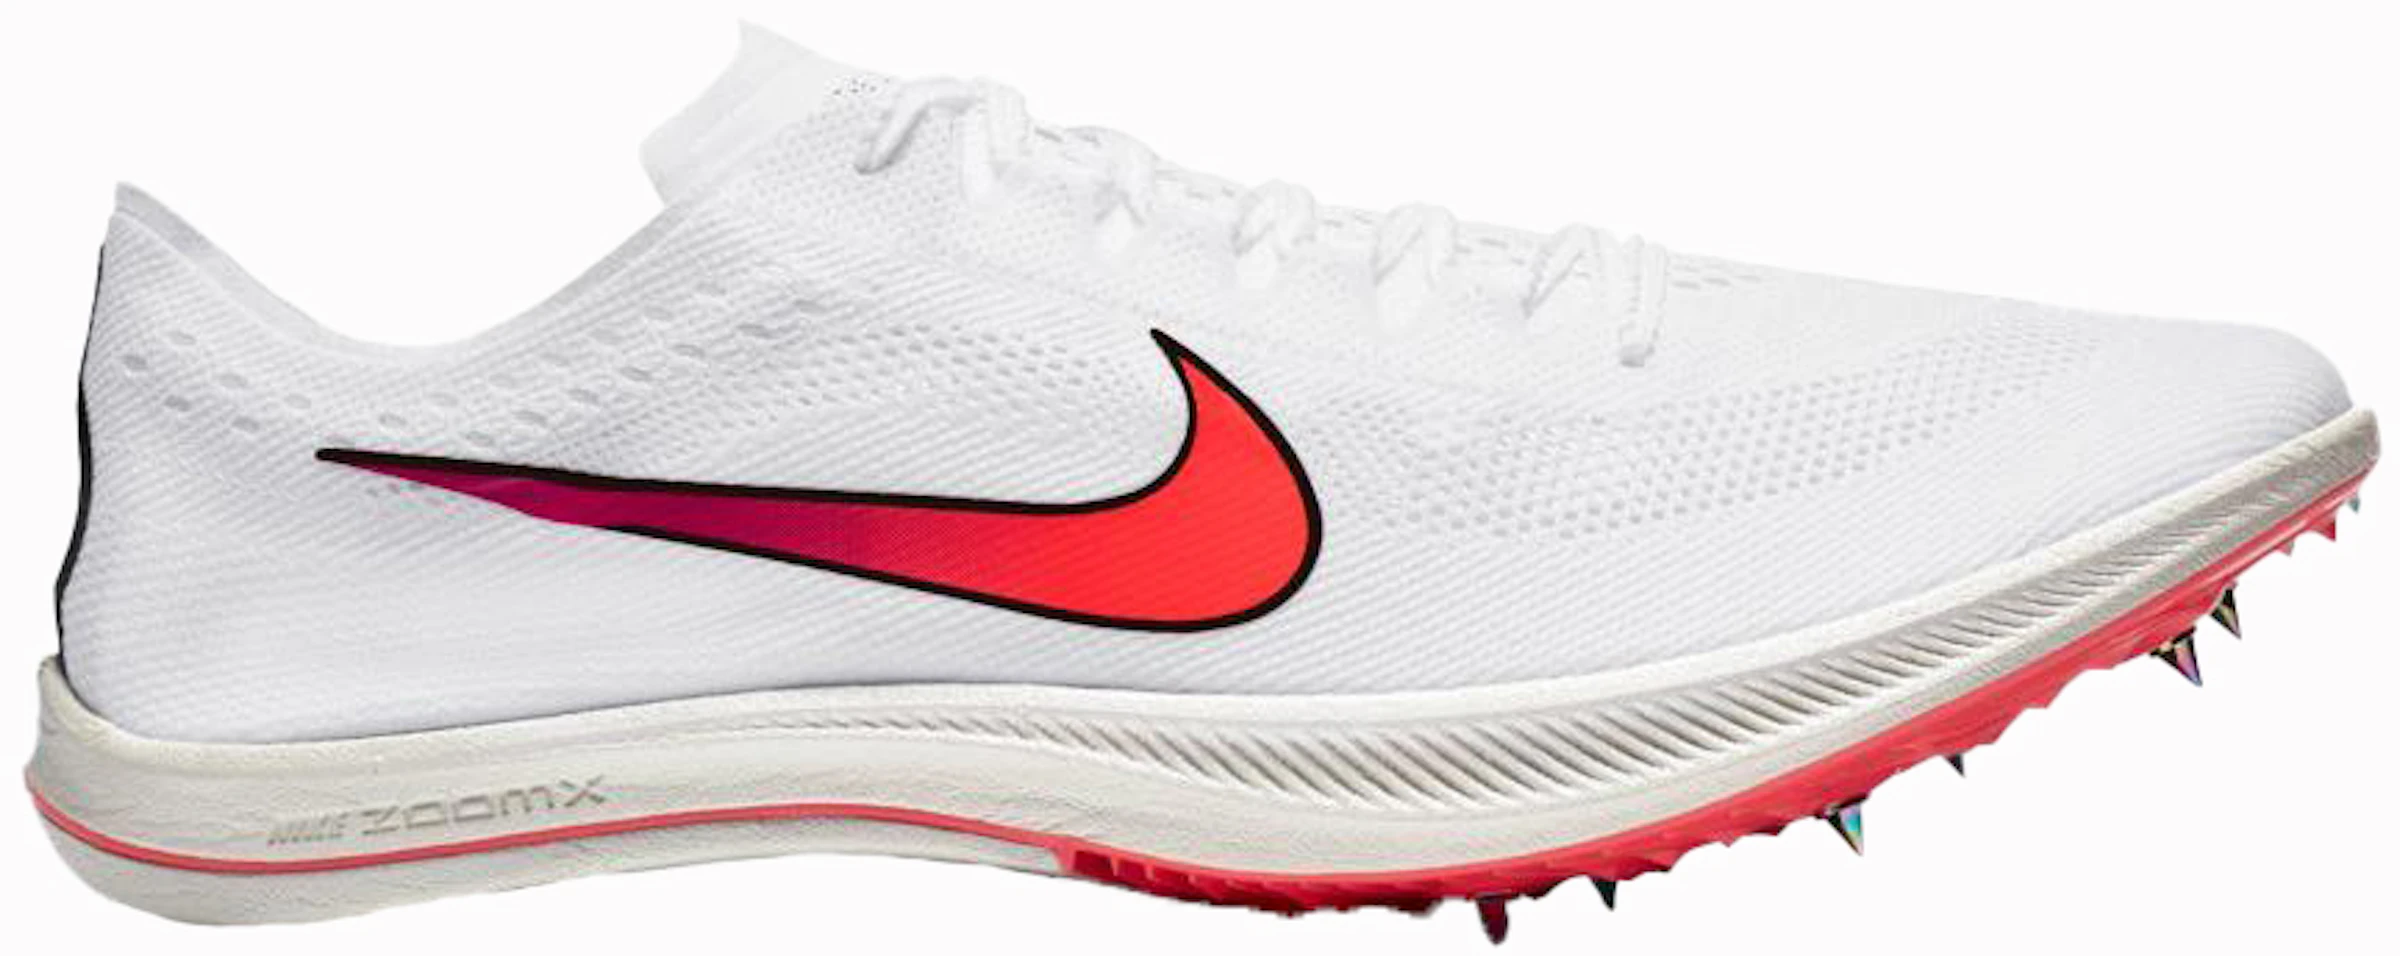 Pegajoso Cuestiones diplomáticas heroína Nike ZoomX Dragonfly Racing Spike White Ombre - CV0400-100 - ES